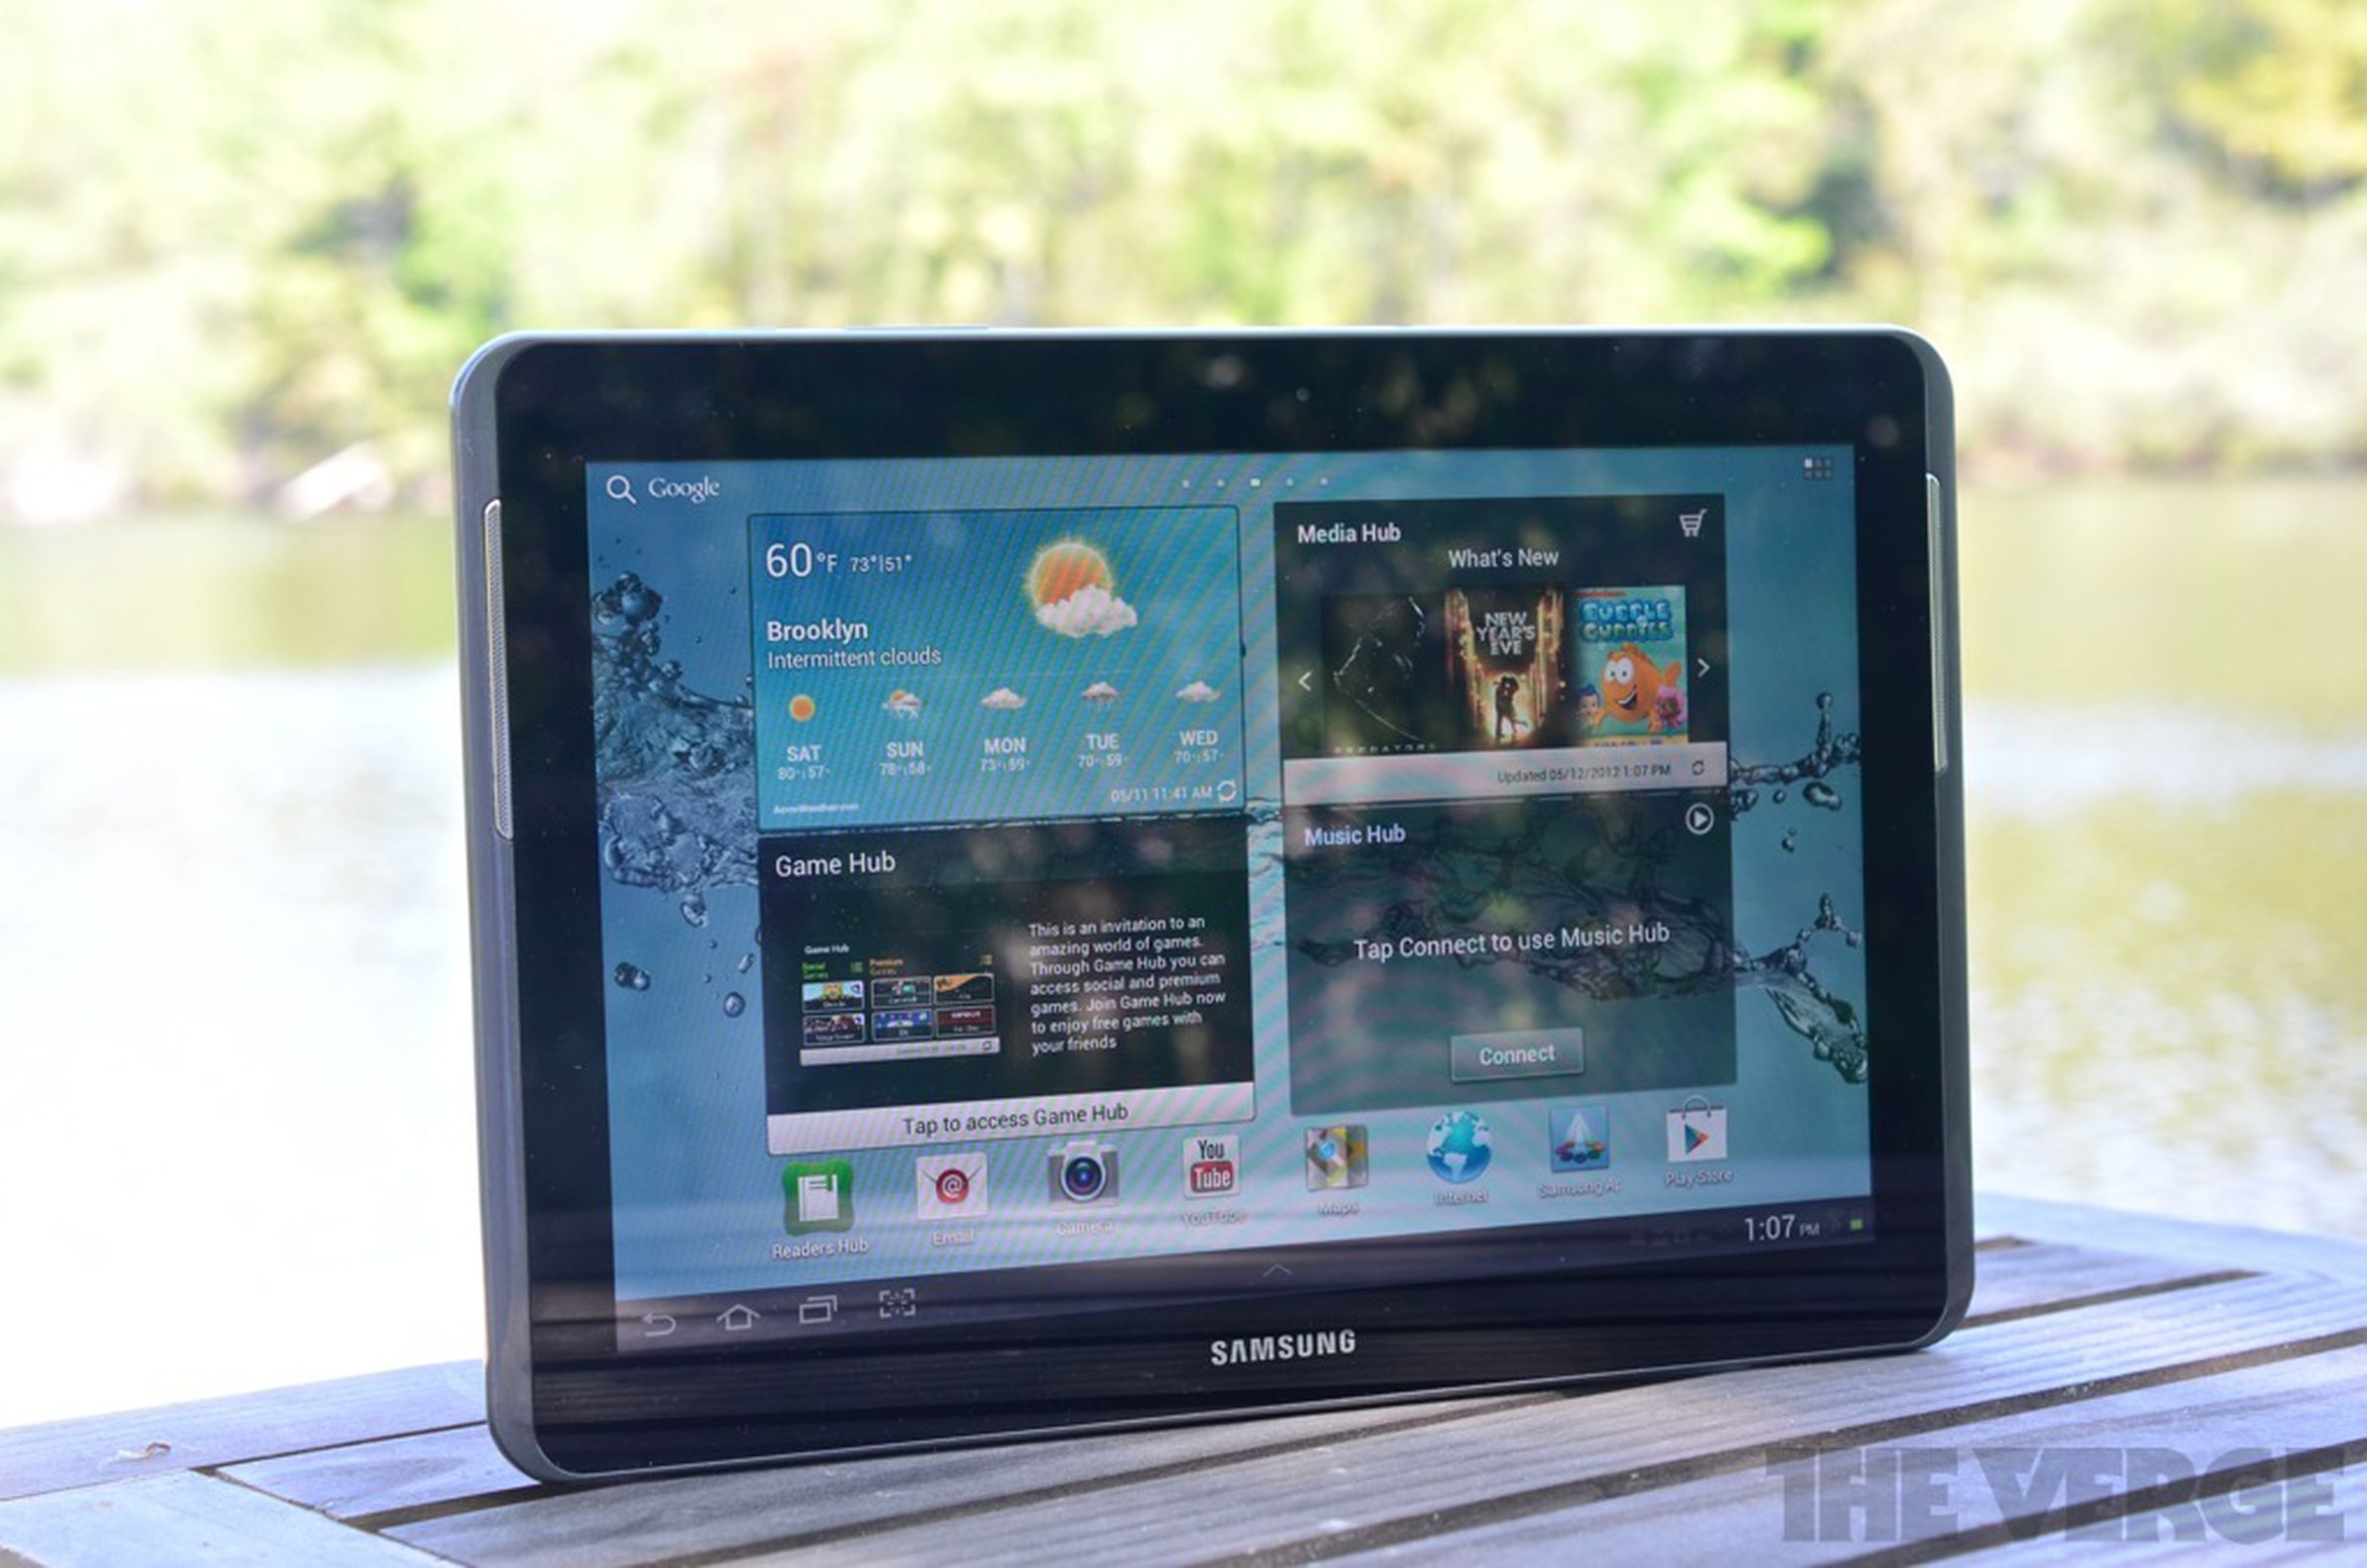 Samsung Galaxy Tab 2 10.1 review pictures